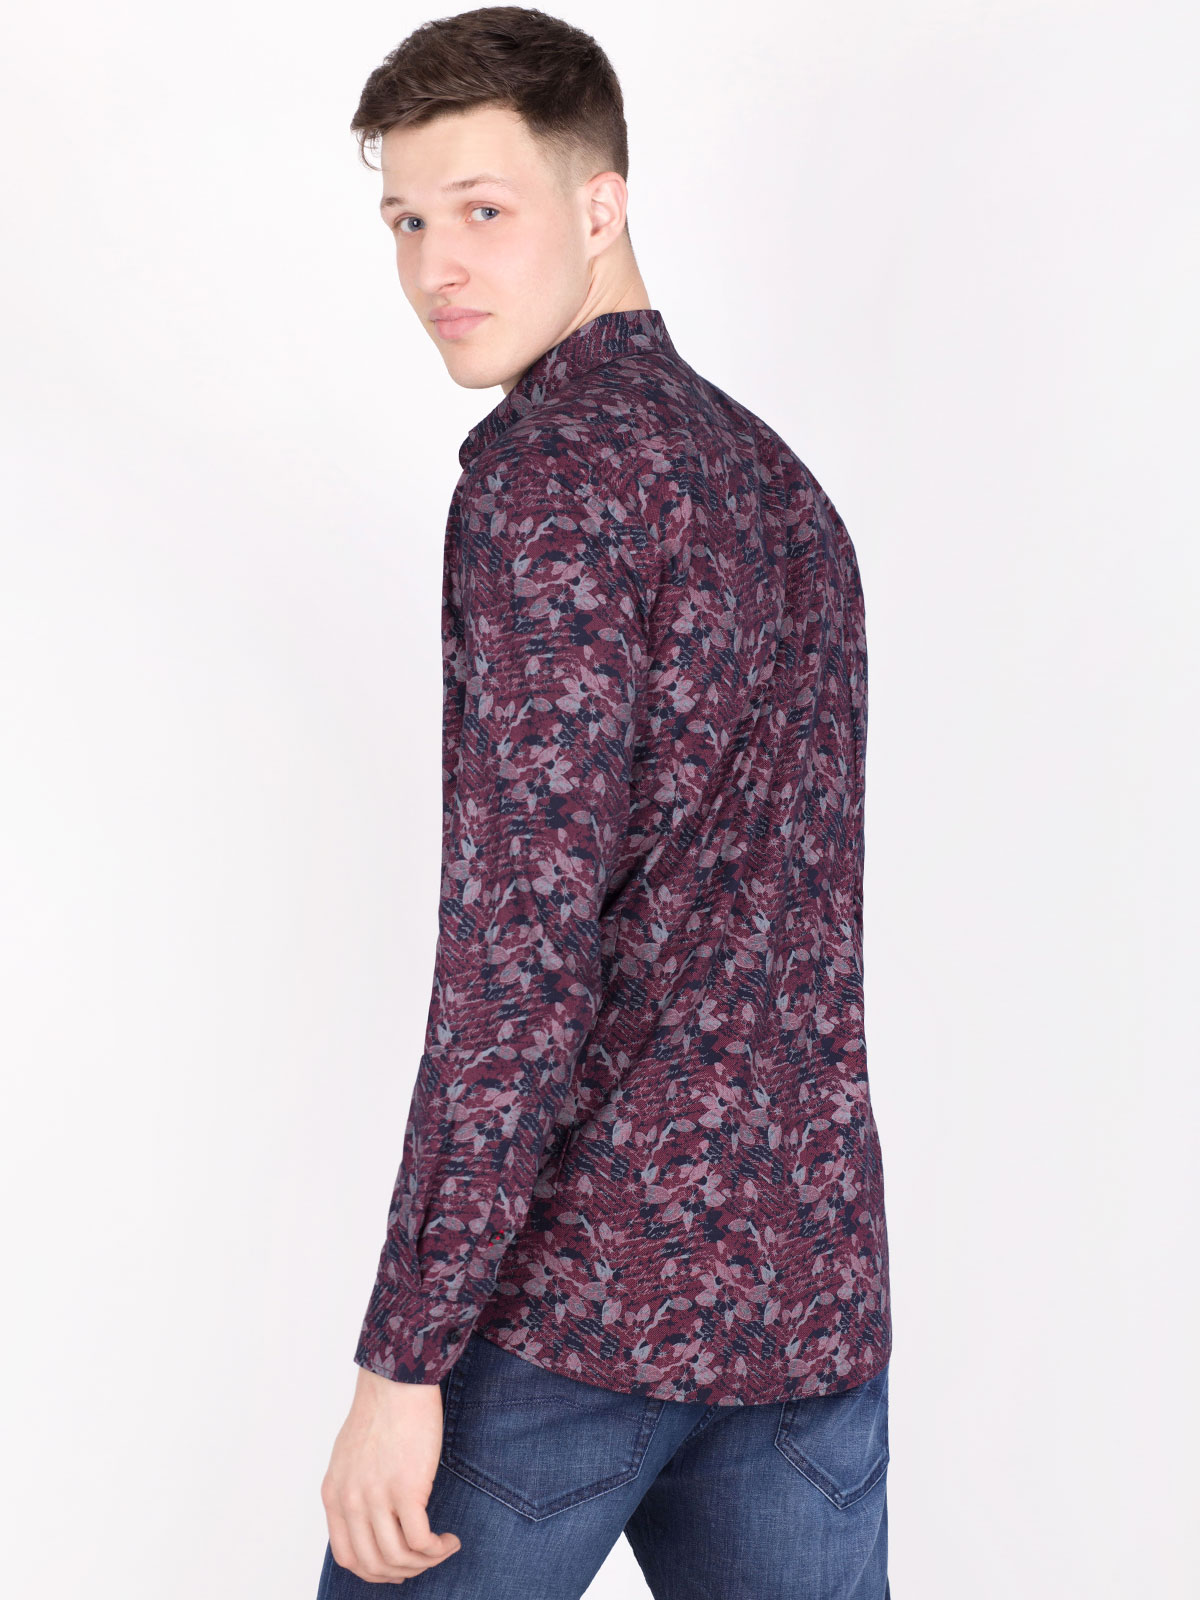 Shirt in burgundy with flowers - 21469 € 16.31 img4